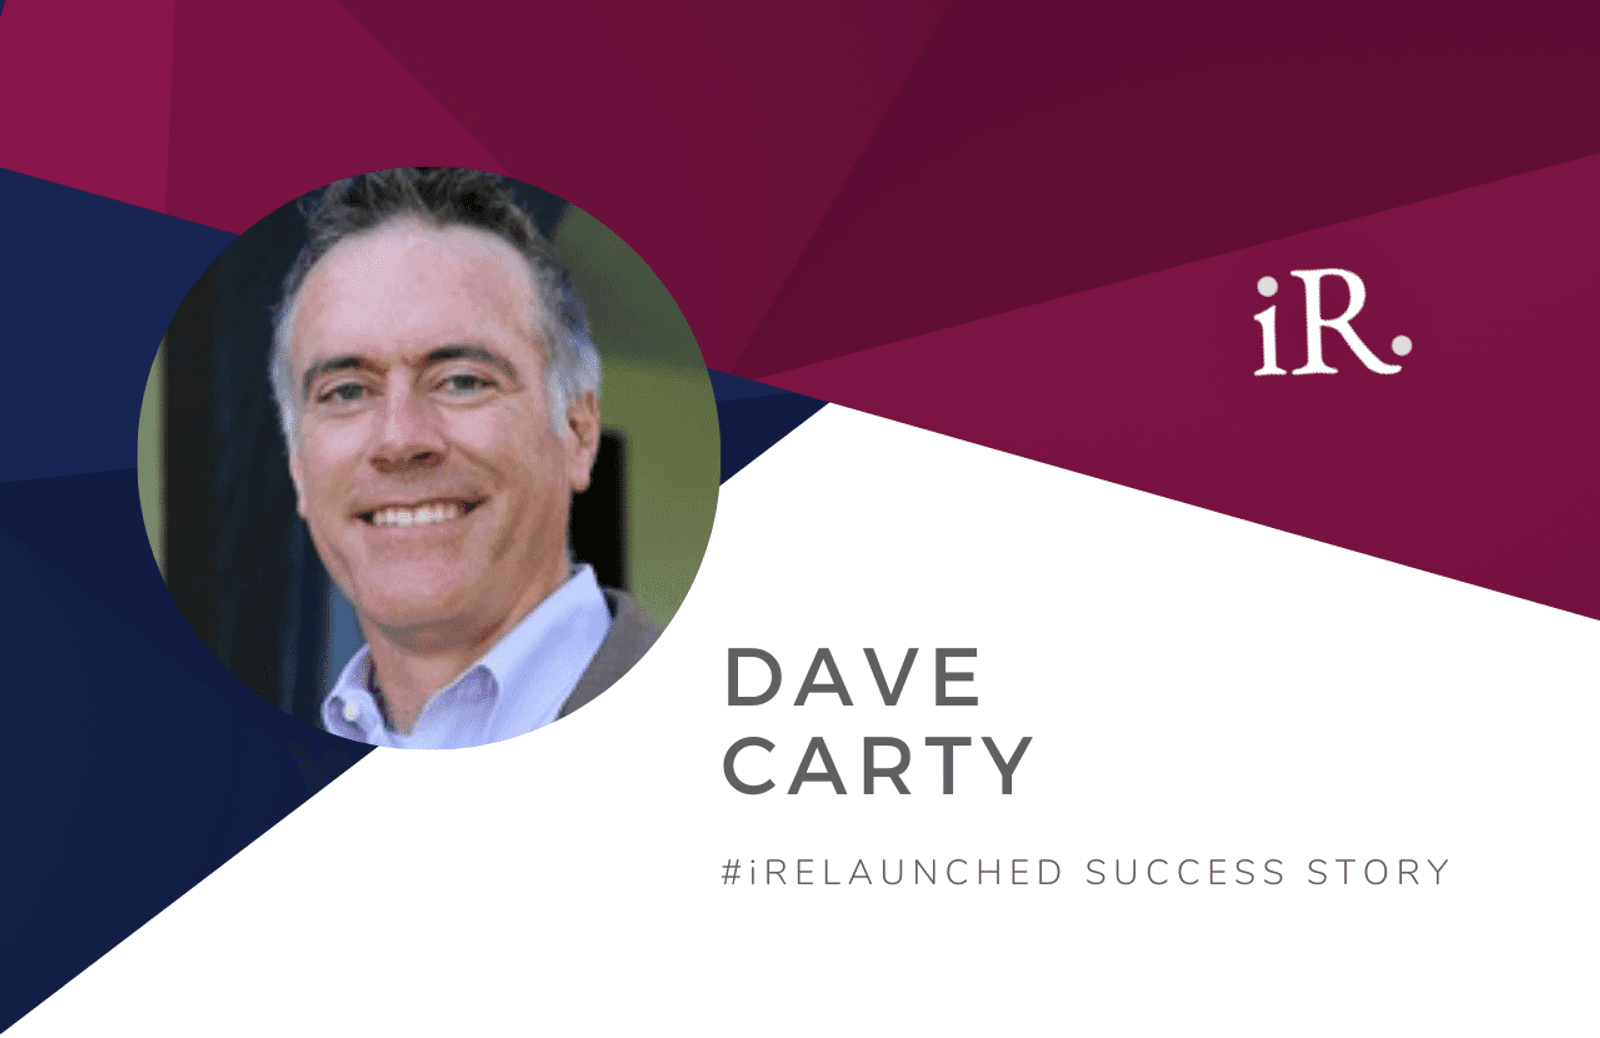 Dave Carty's headshot and the text #iRelaunched Success Story along with the iRelaunch logo.  A navy and maroon geometric textured background intersect behind Dave's headshot.